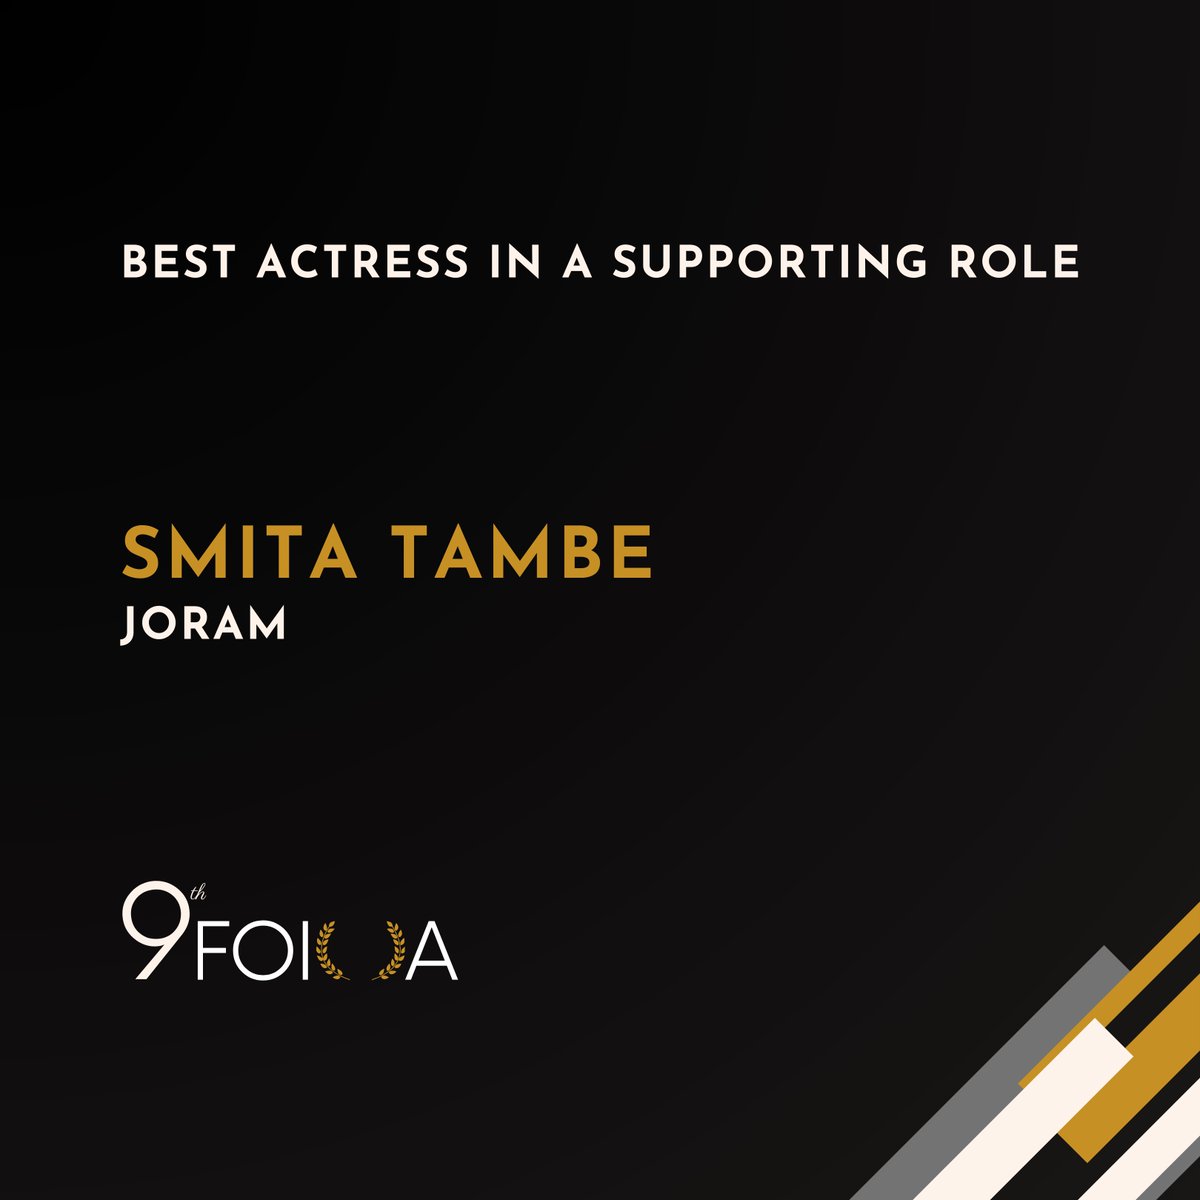 #9thFOIOA Best Actress in a Supporting Role Smita Tambe, Joram